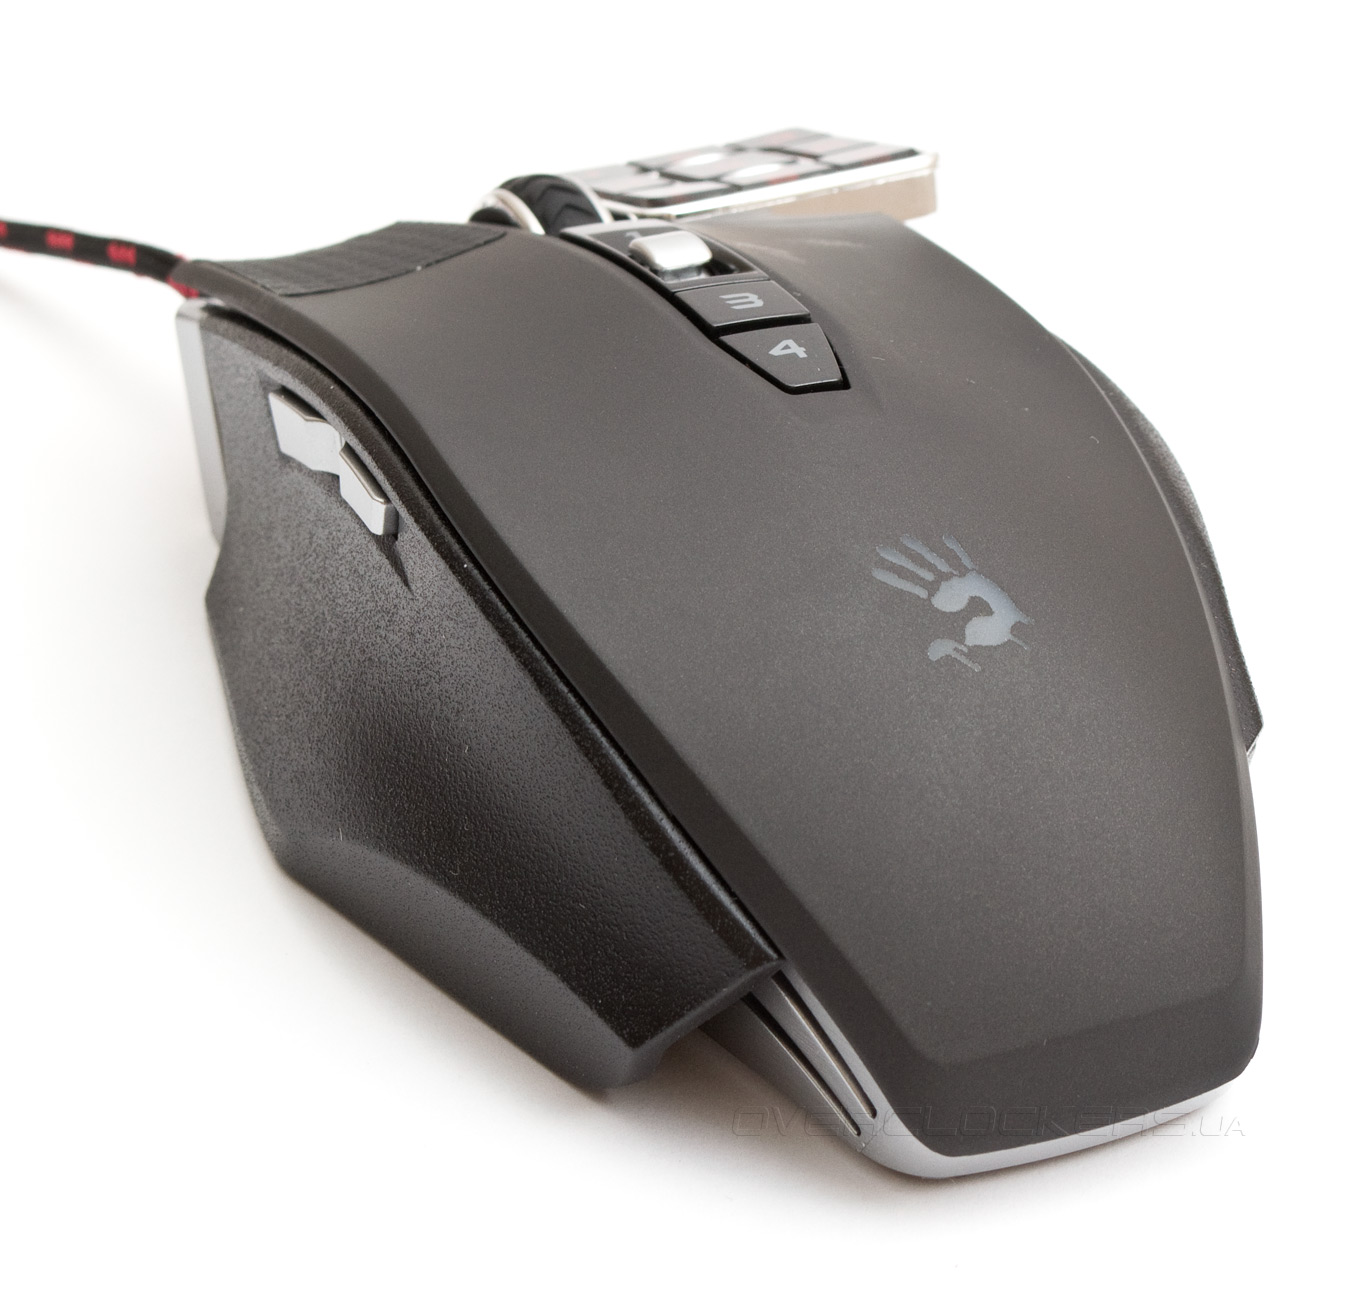 Blacklisted device bloody mouse a4tech rust x7 фото 110